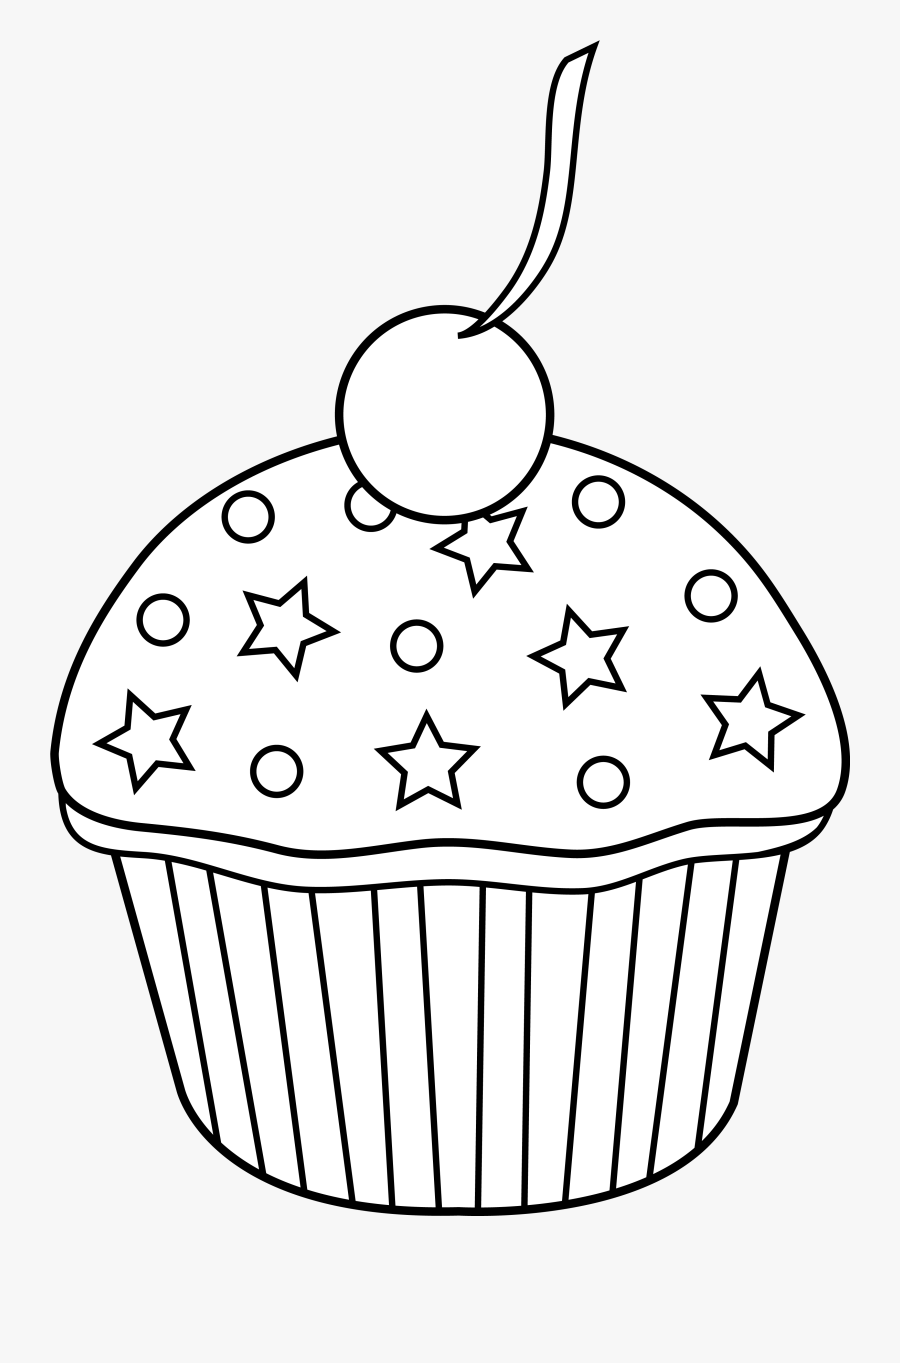 Cute Colorable Cupcake Design Free Clip Art - Cake Clipart Black And White Png, Transparent Clipart